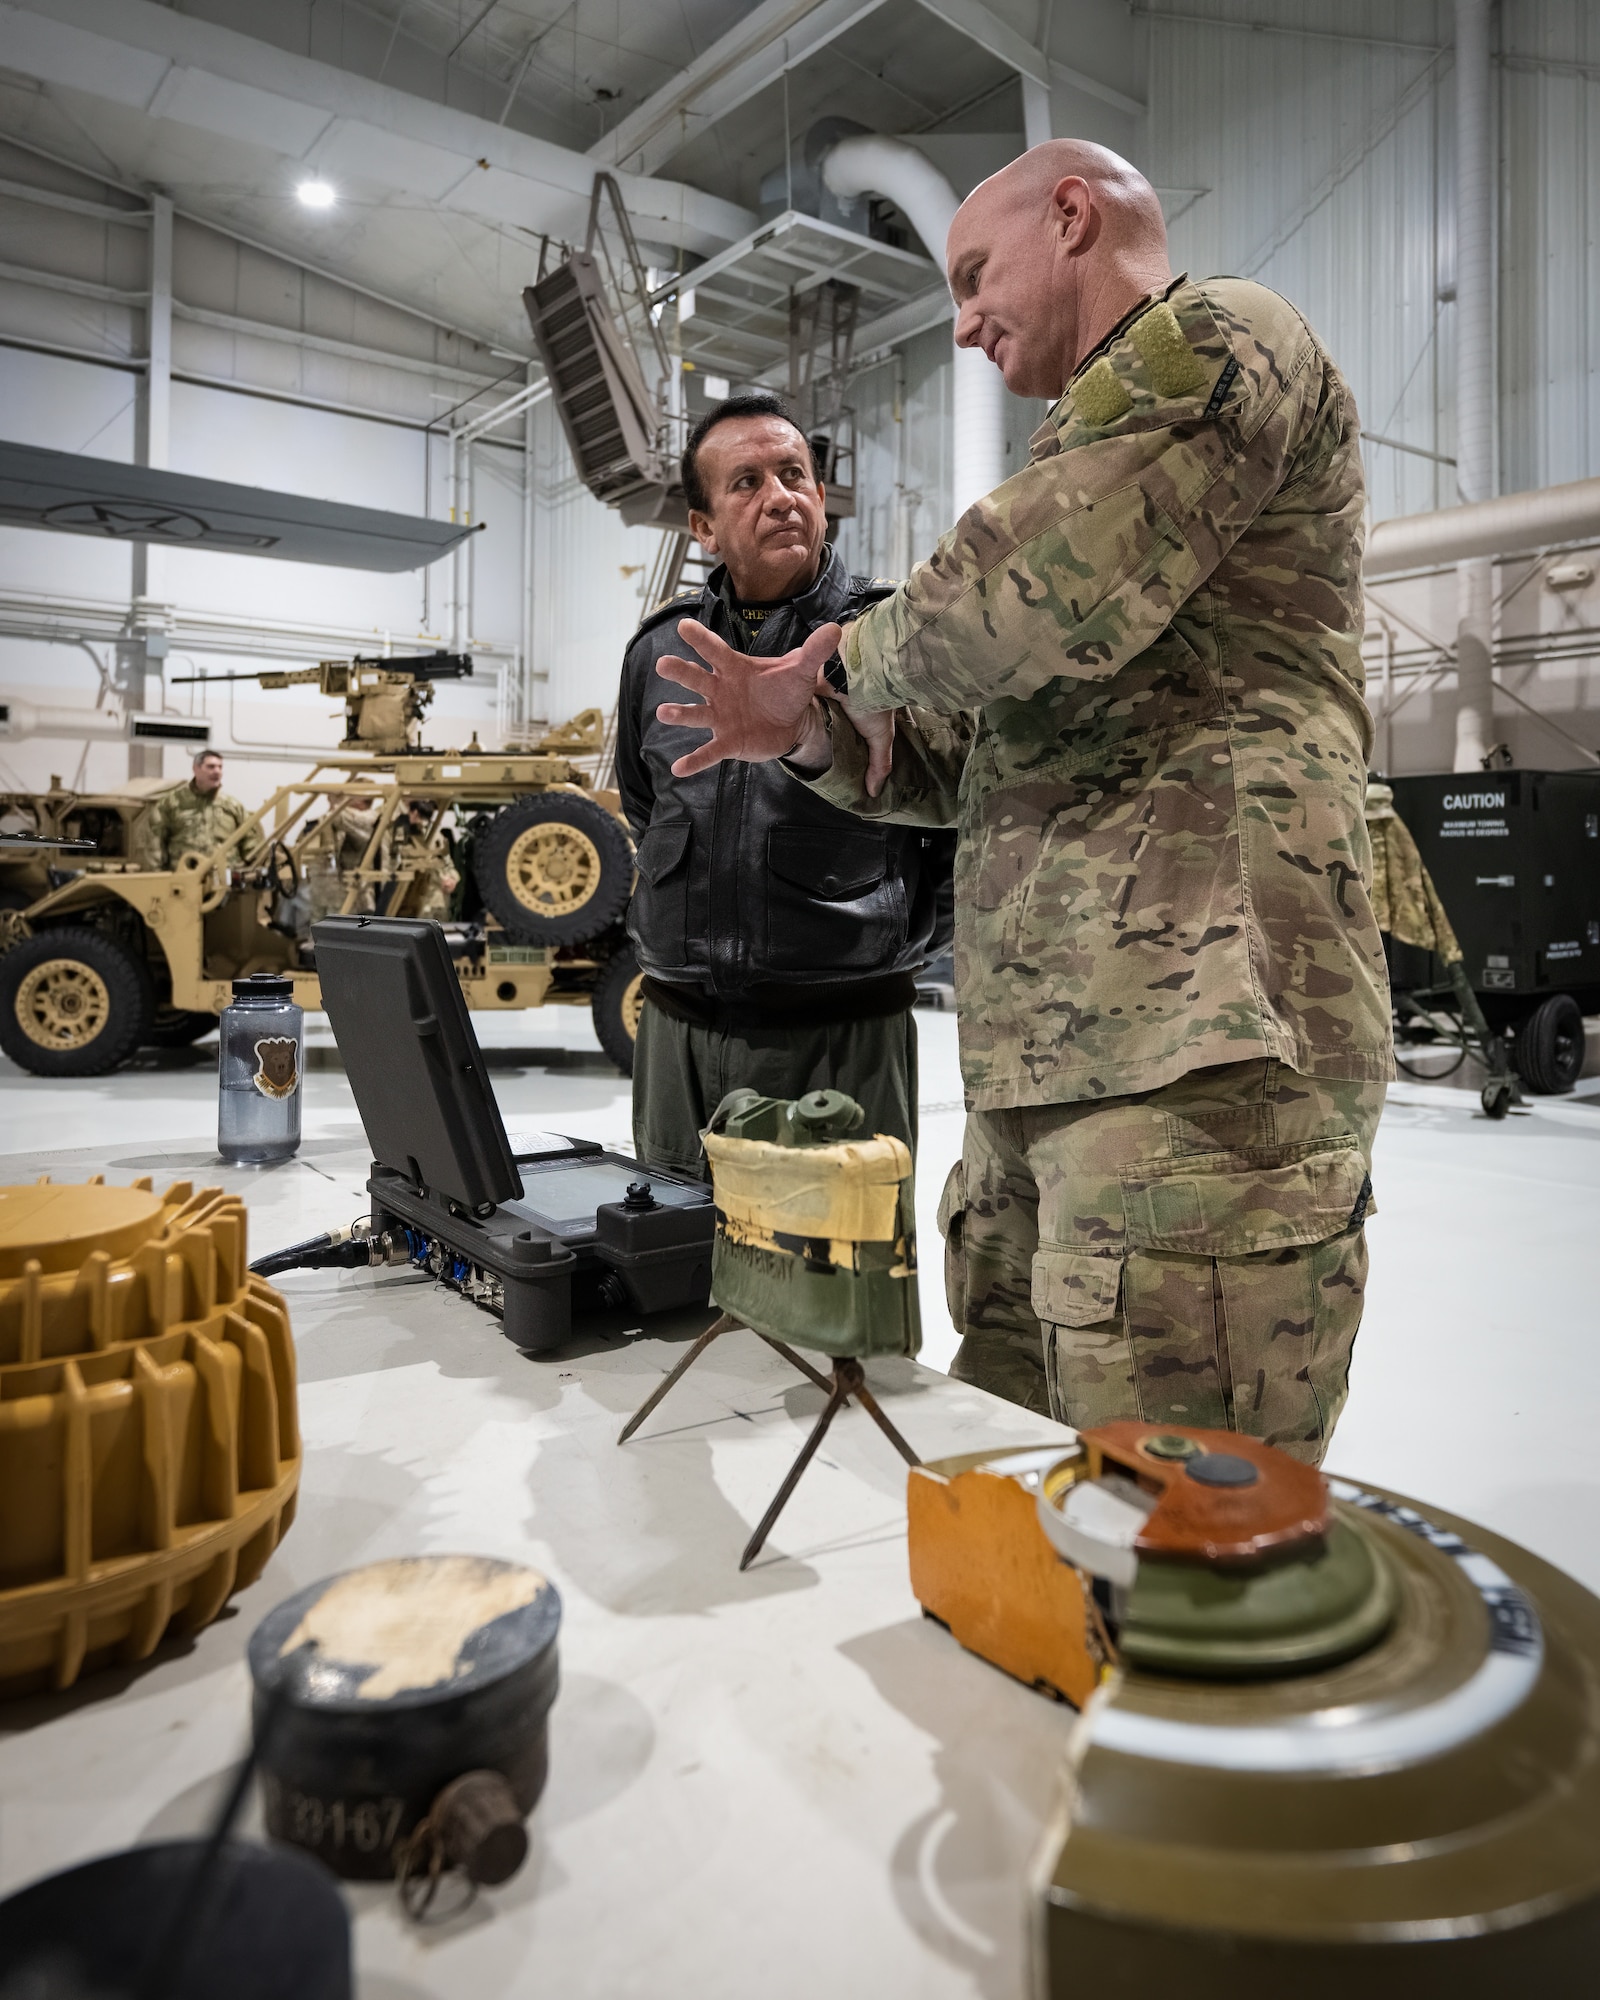 U.S. Air Force Master Sgt. Dustin Turner, right, an explosive ordnance disposal specialist assigned to the Kentucky Air National Guard’s 123rd Airlift Wing, discusses the use of remote-controlled EOD robots with Ecuadorian Air Force Maj. Gen. Mauricio Xavier Salazar at the Kentucky Air National Guard Base in Louisville, Ky., Jan. 31, 2024. Salazar is one of several Ecuadorian military leaders visiting this week to exchange information with the Kentucky National Guard as part of the State Partnership Program, a National Guard Bureau effort that pairs Guard units with foreign allies to foster enhanced understanding across all aspects of civil and military affairs. (U.S. Air National Guard photo by Dale Greer)